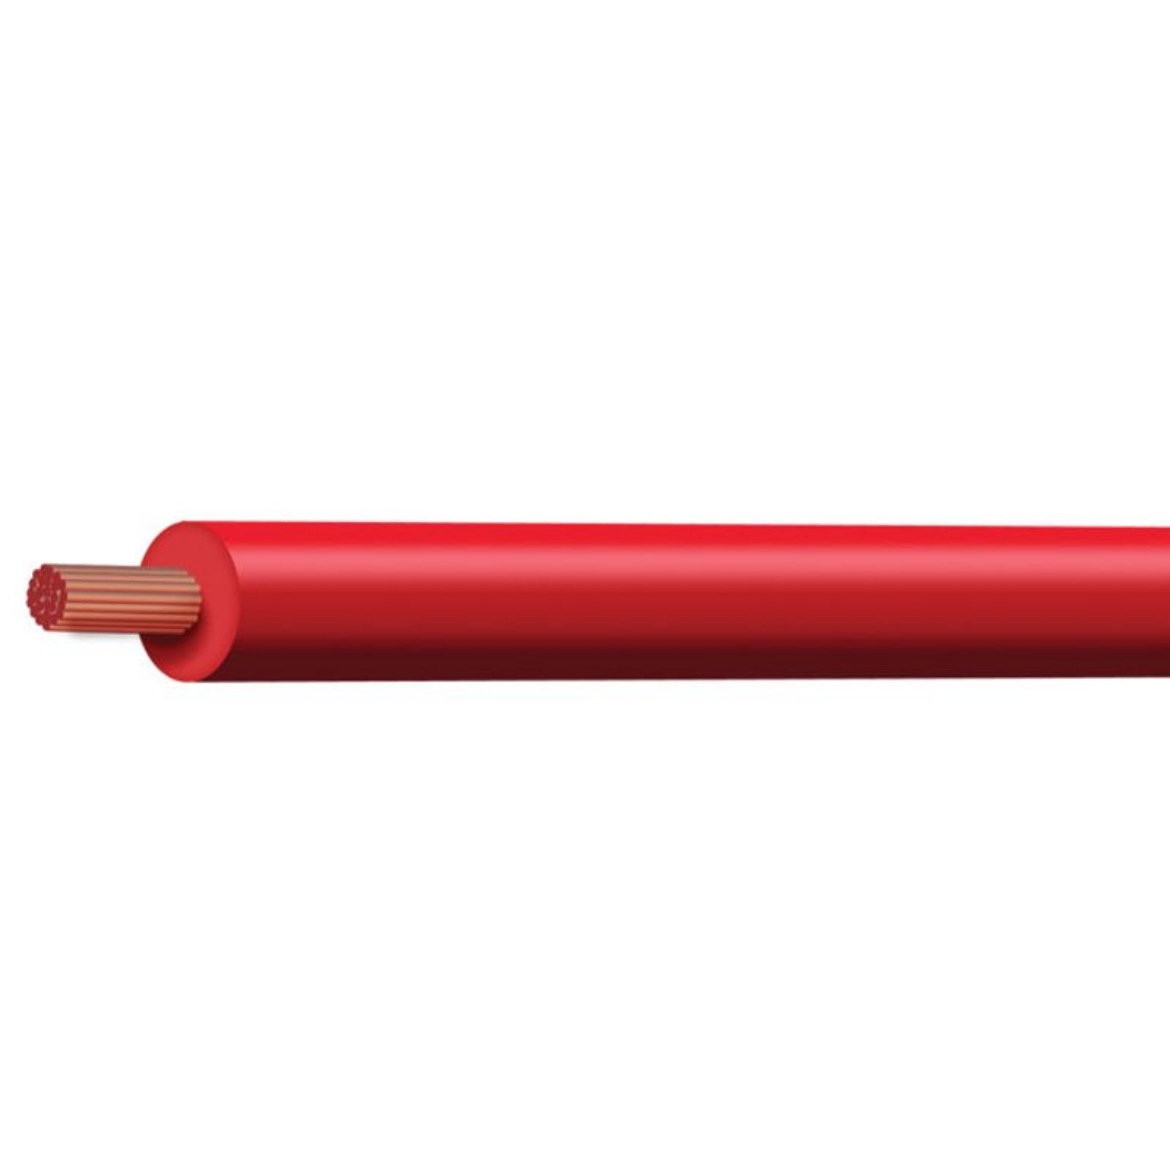 Picture of TYCAB SINGLE CORE CABLE BATTERY 2 B & S CROSS SECT 32.15MM SQ RATING 230A RED